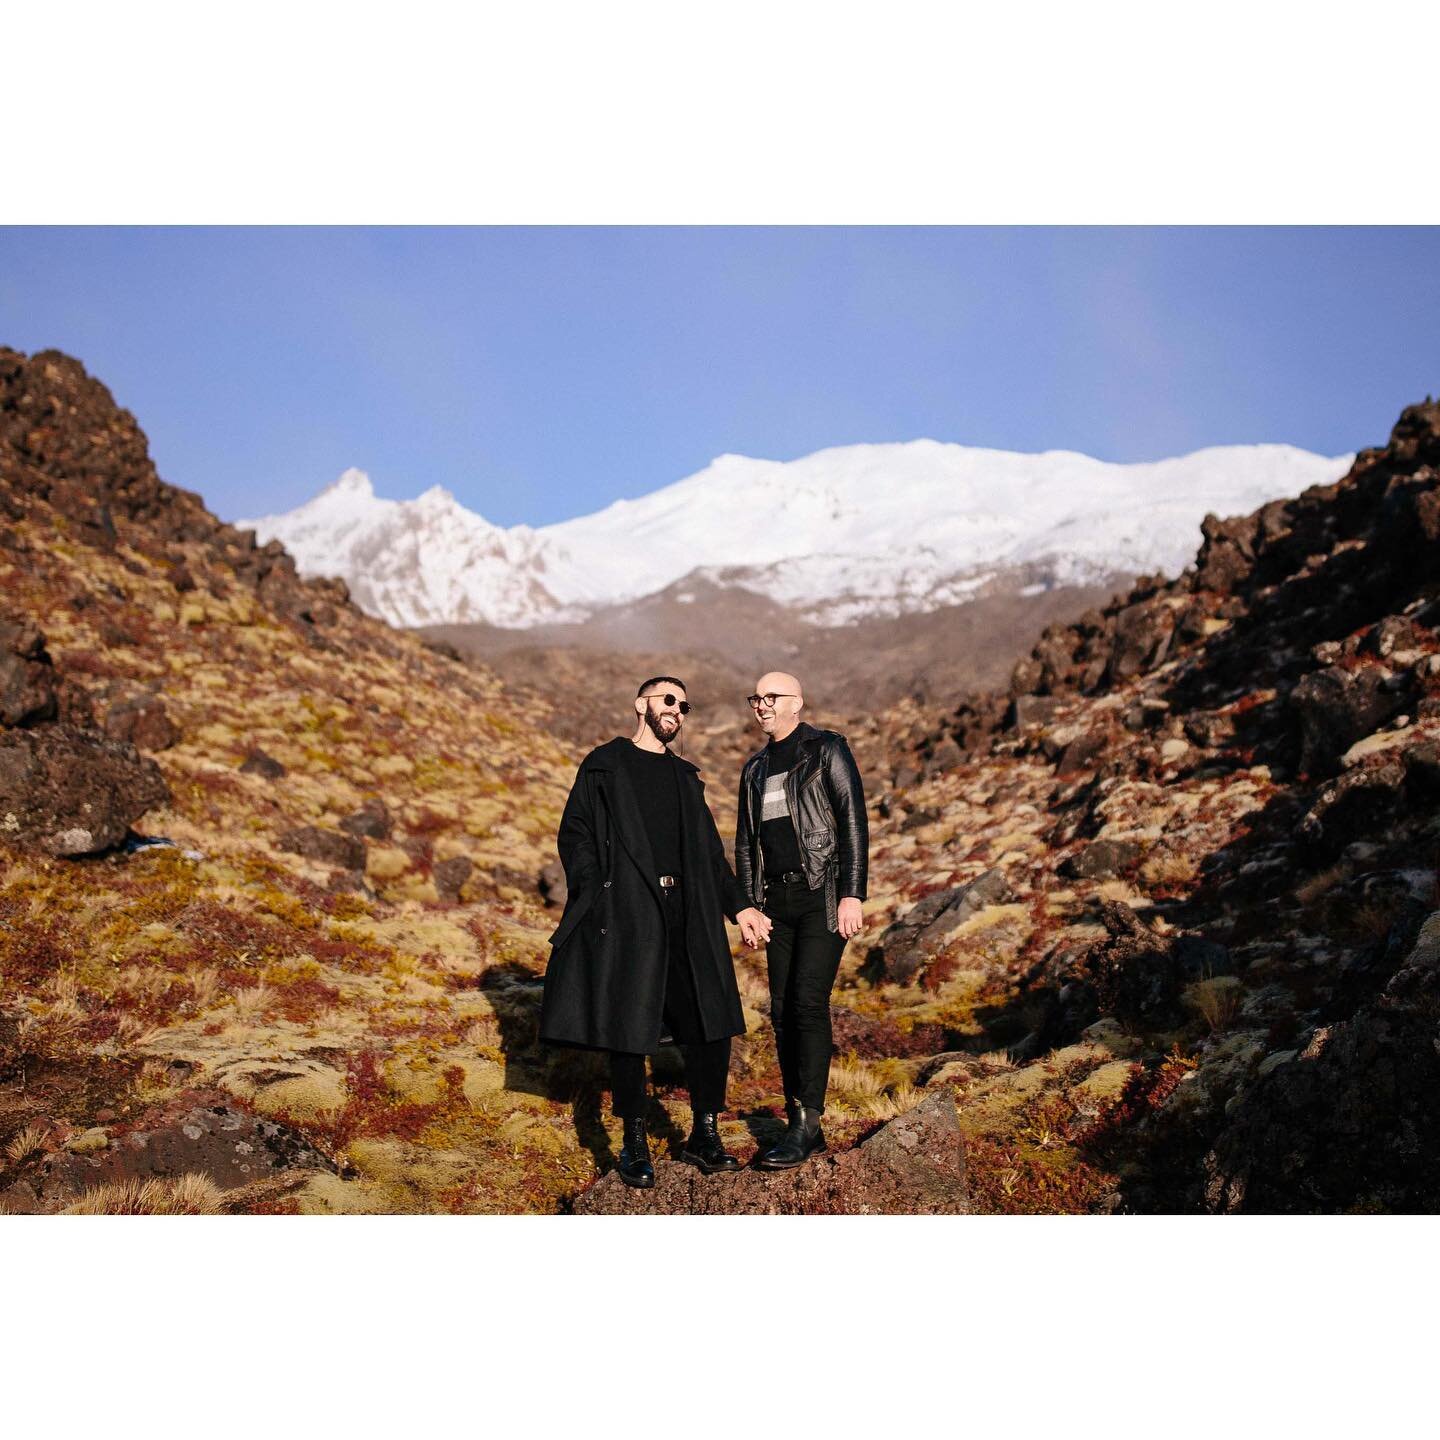 The enigmatic George and Scott gracing your screens once again. Another roady with my loves and this year we nabbed some snaps of these two beauties at the base of Mt Ruapehu. After some glorious sun the mist rolled in which made the red landscape lo